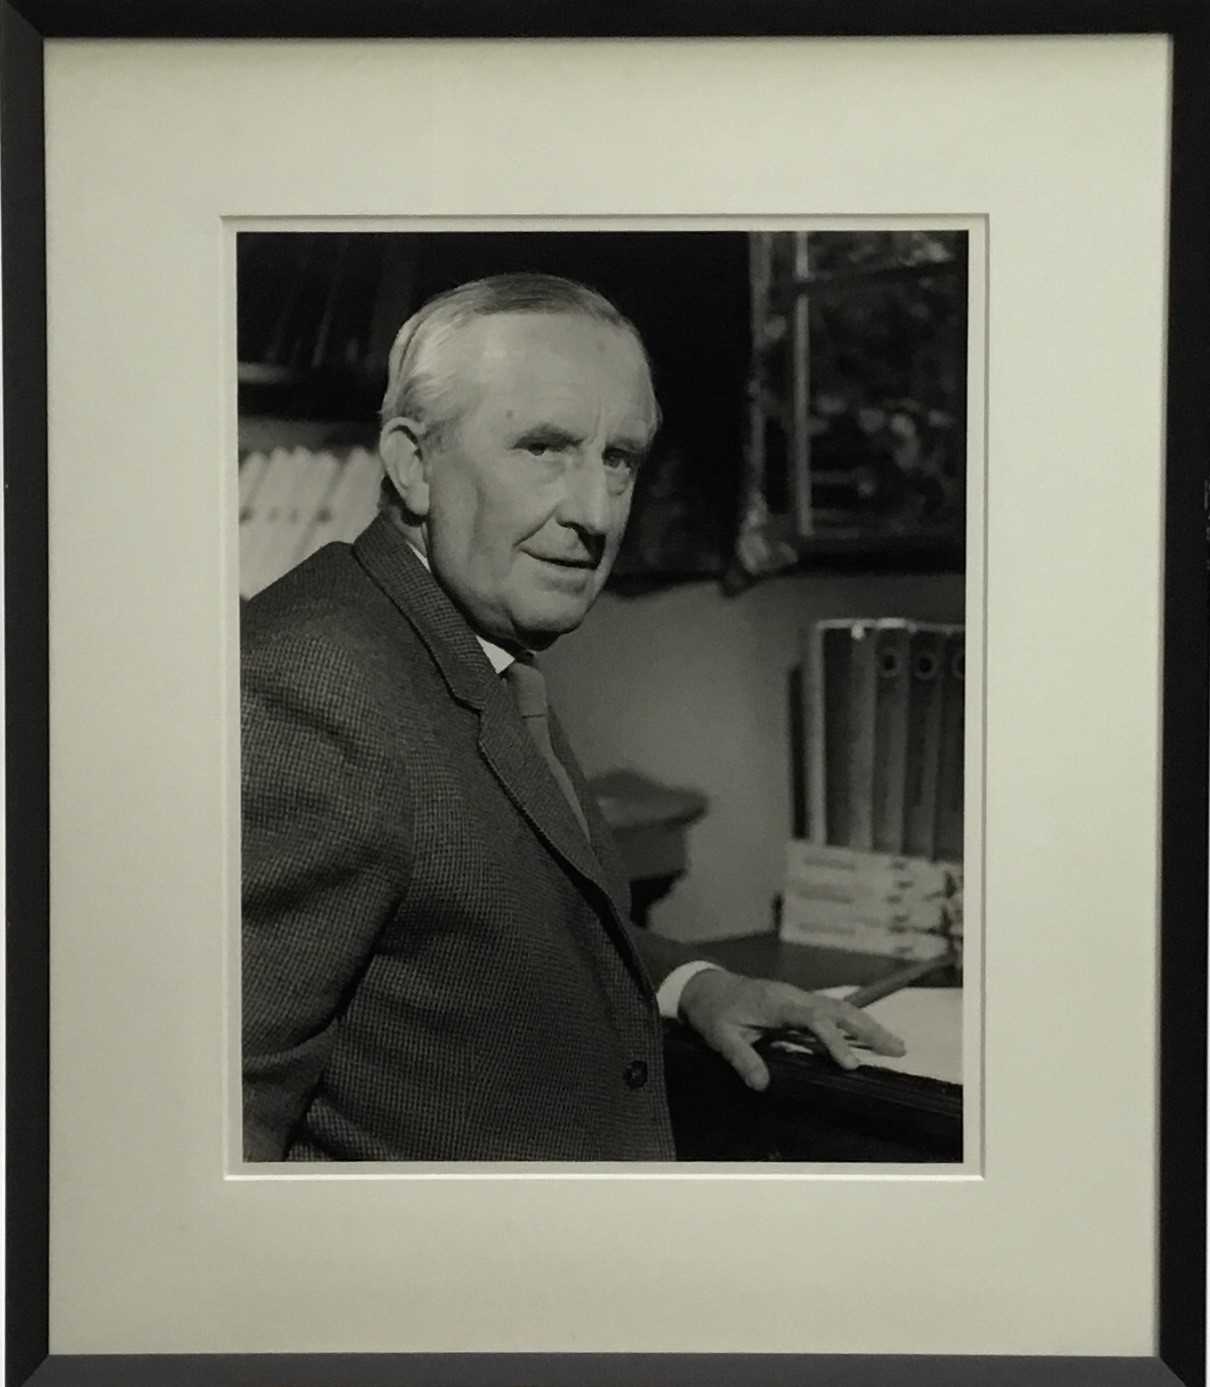 Lot 1549 - Pamela Chandler (1928-1993) photographic portrait of Professor  J. R. R. Tolkien, together with seven other portrait studies of other subjects